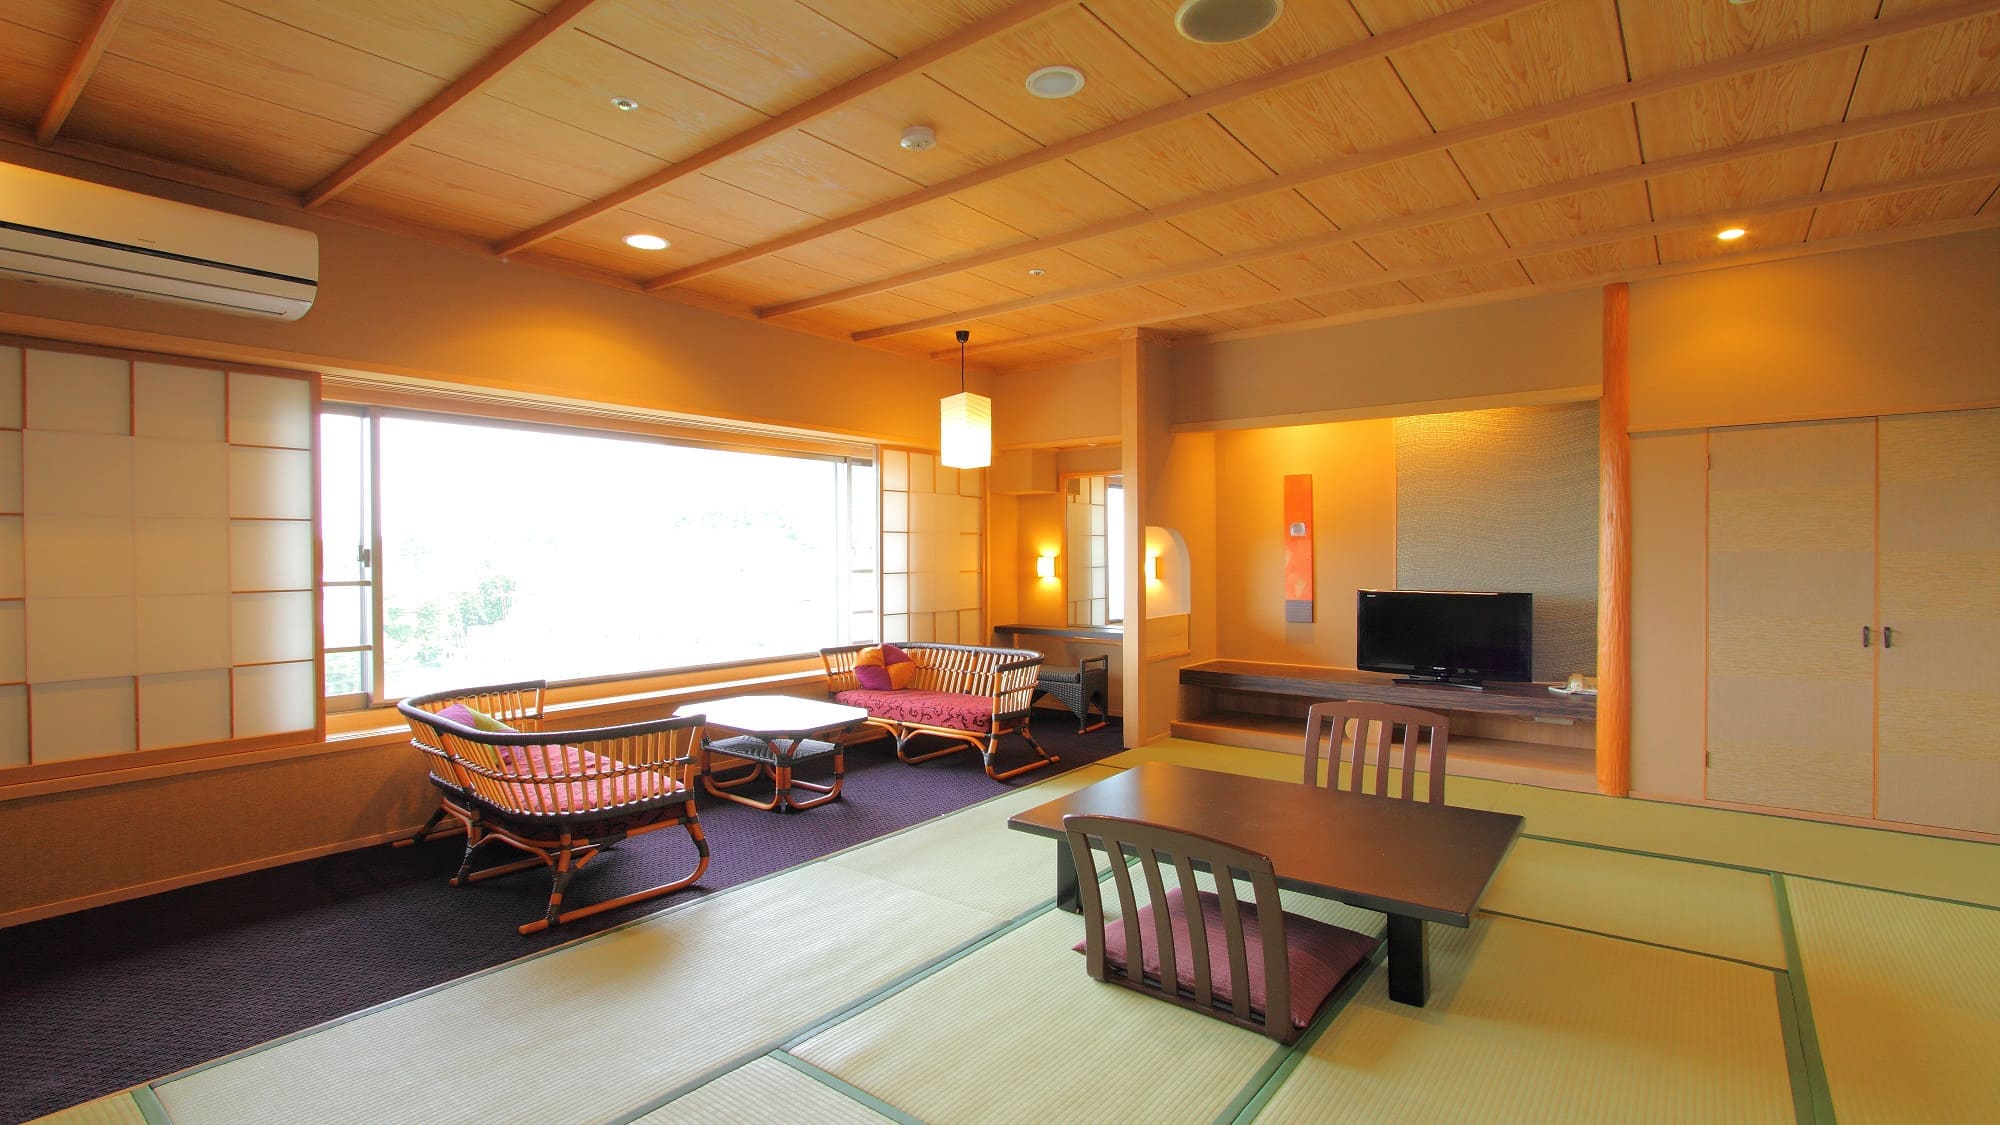 11.5 tatami Japanese-style room (example) * There are different types